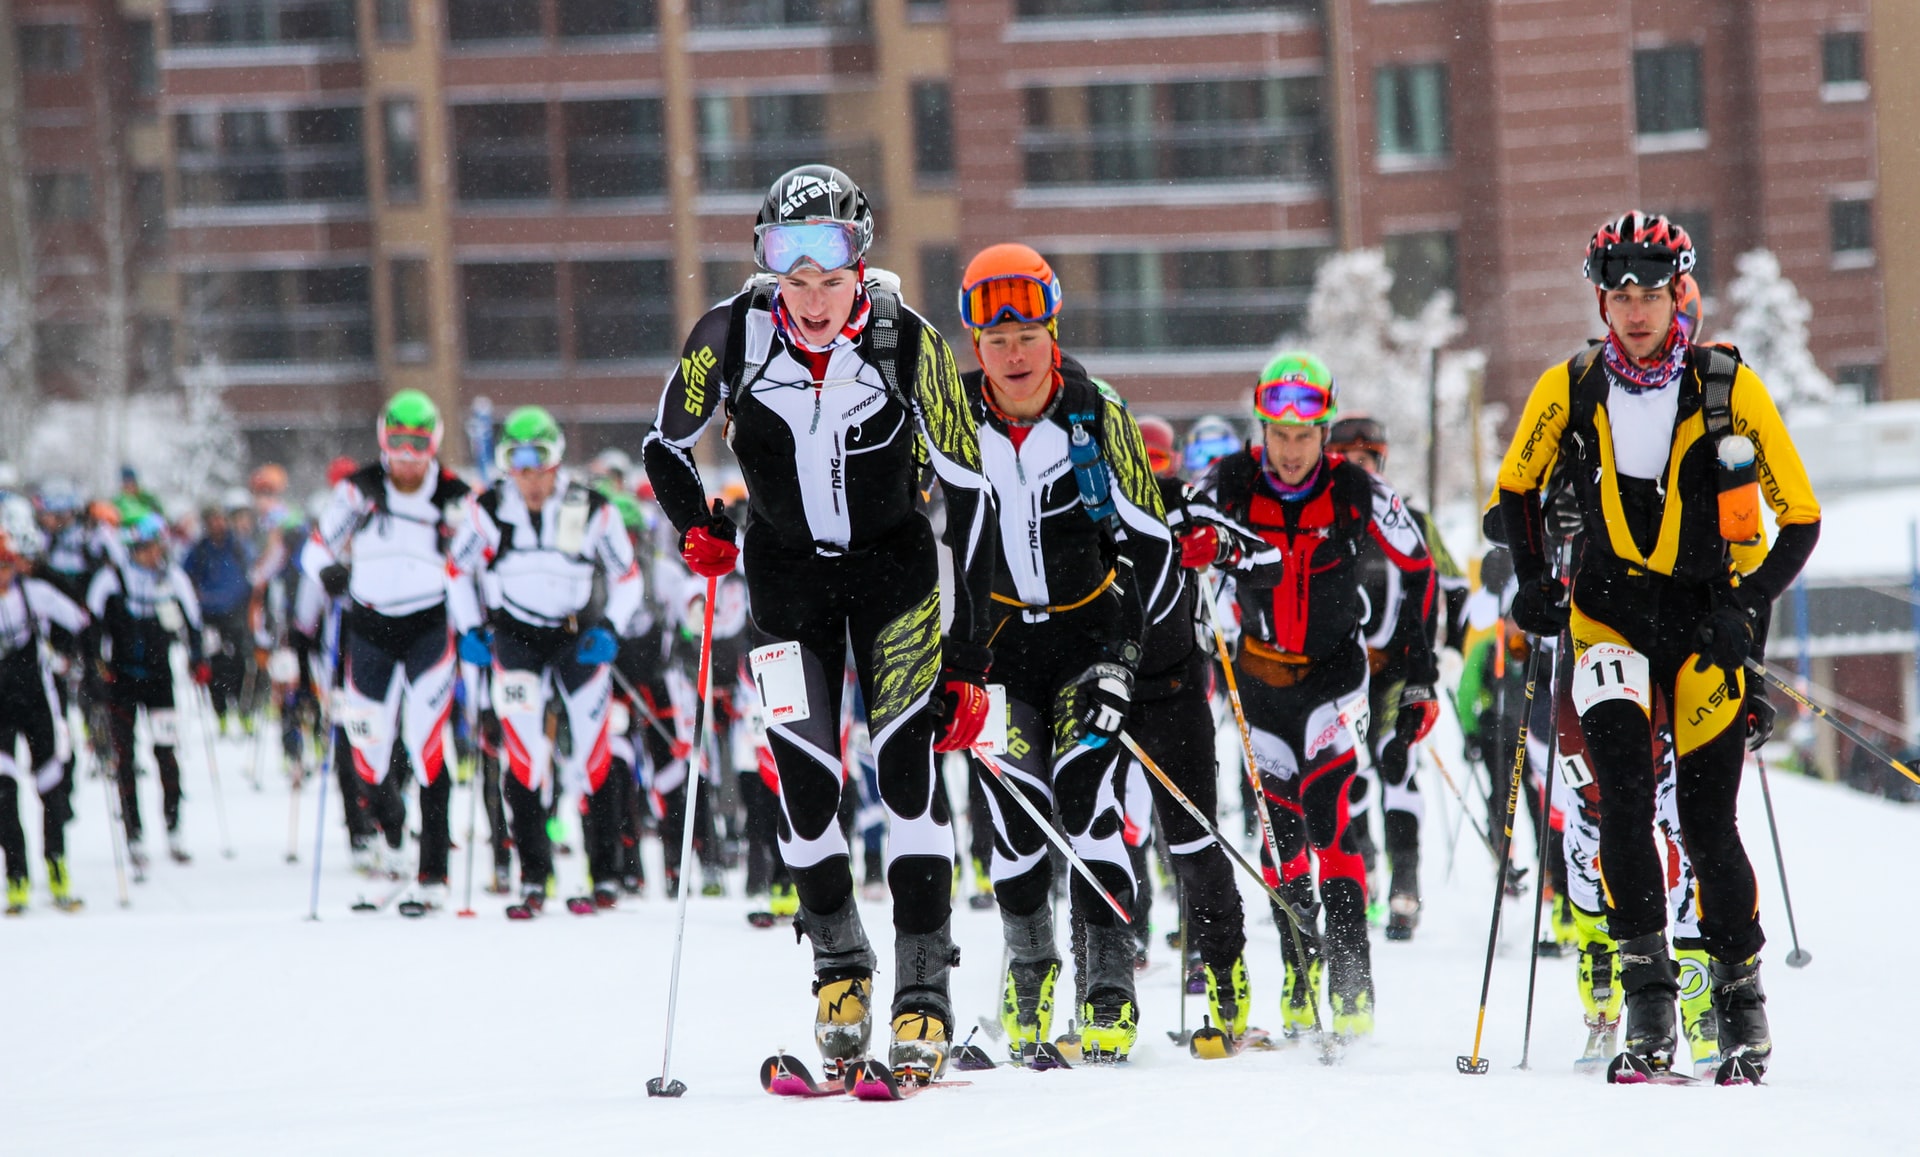 Can You Bet On Skiing Events? - Ski Peak Blog